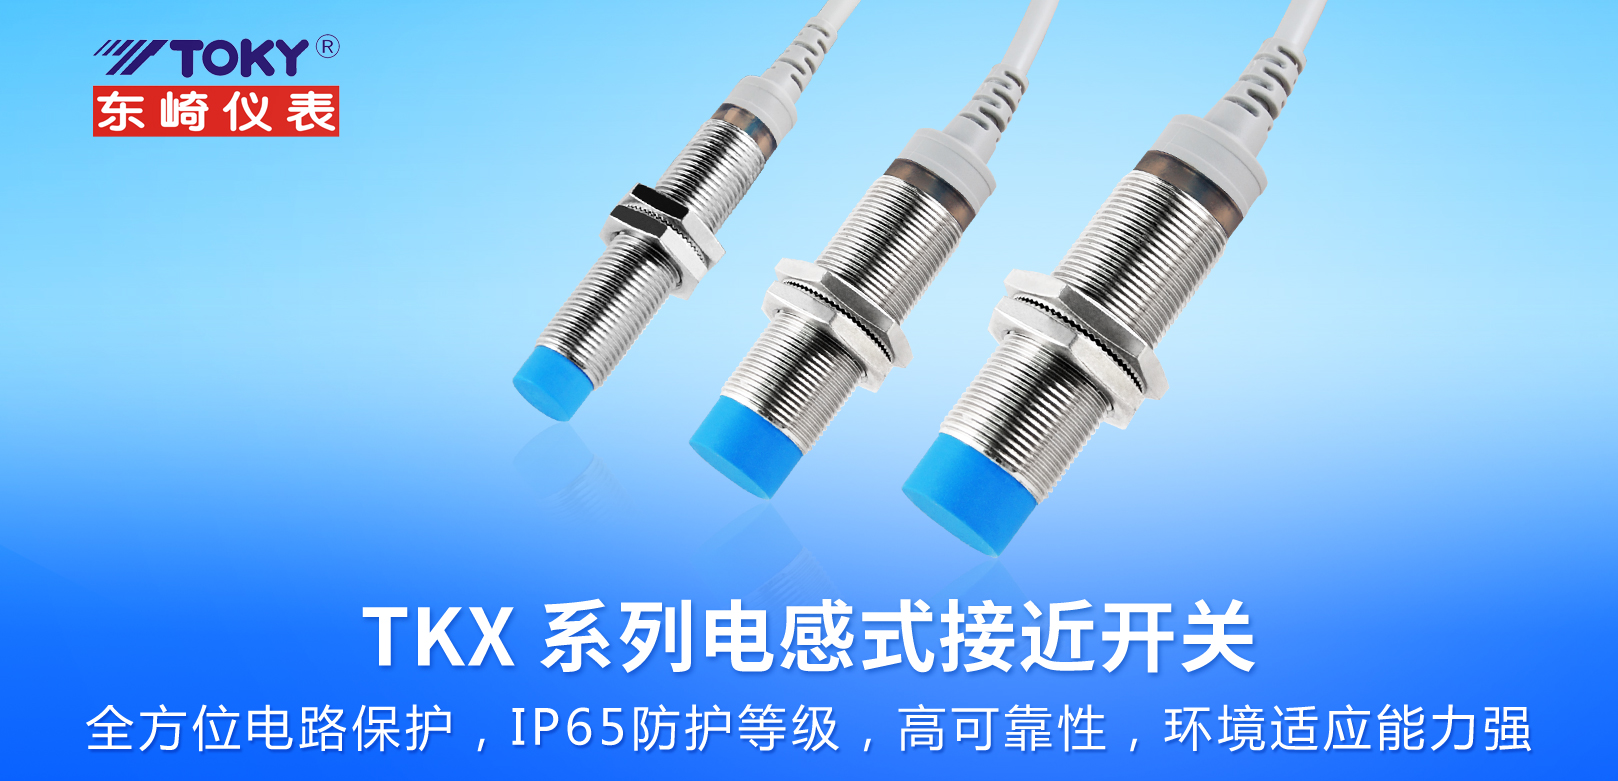 New Products │TKX Series Inductive Proximity Switches